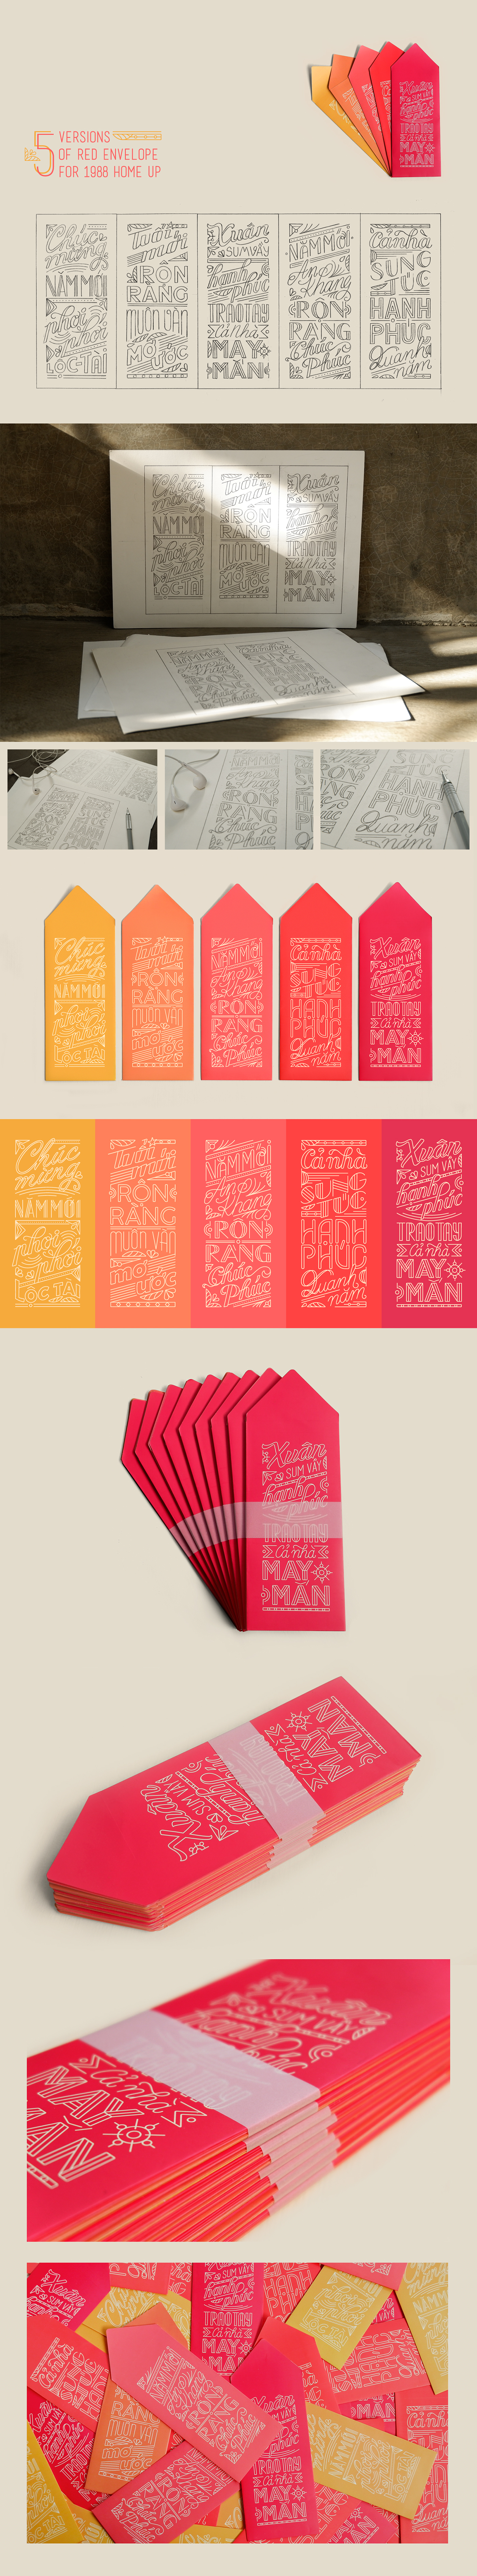 Lunar New Year Red Envelope new year Tet Holiday